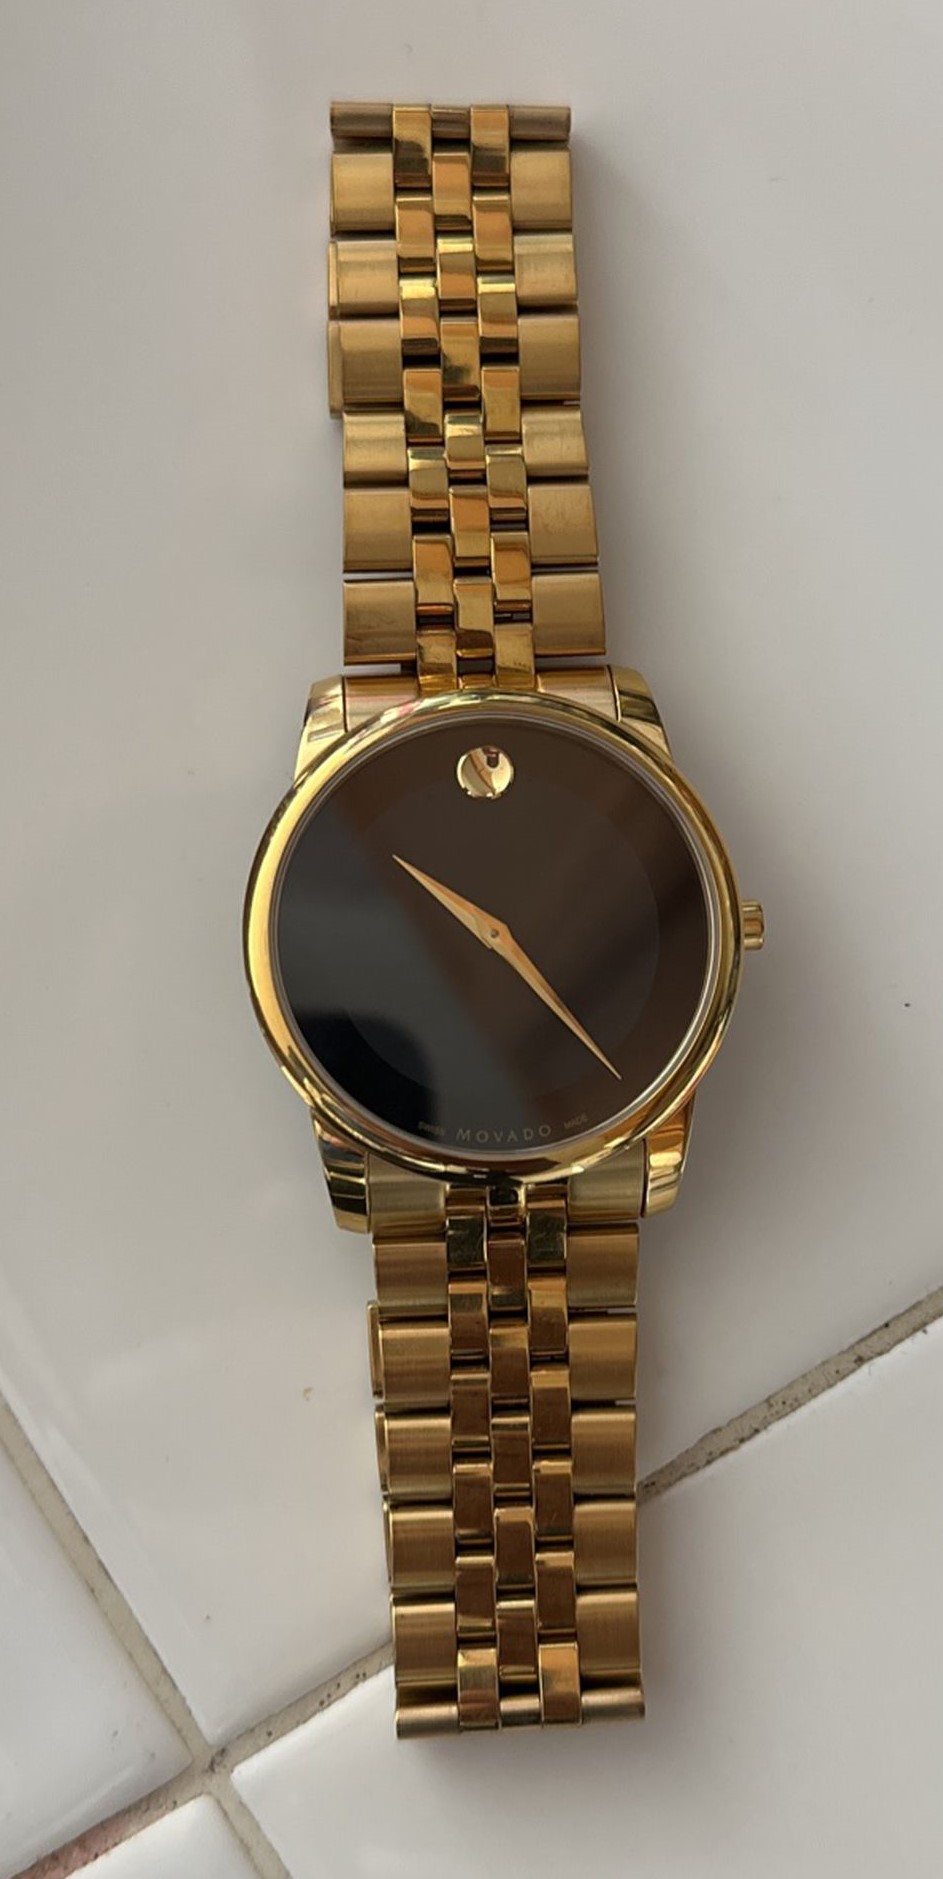 Movado Luxury Watch - used retail